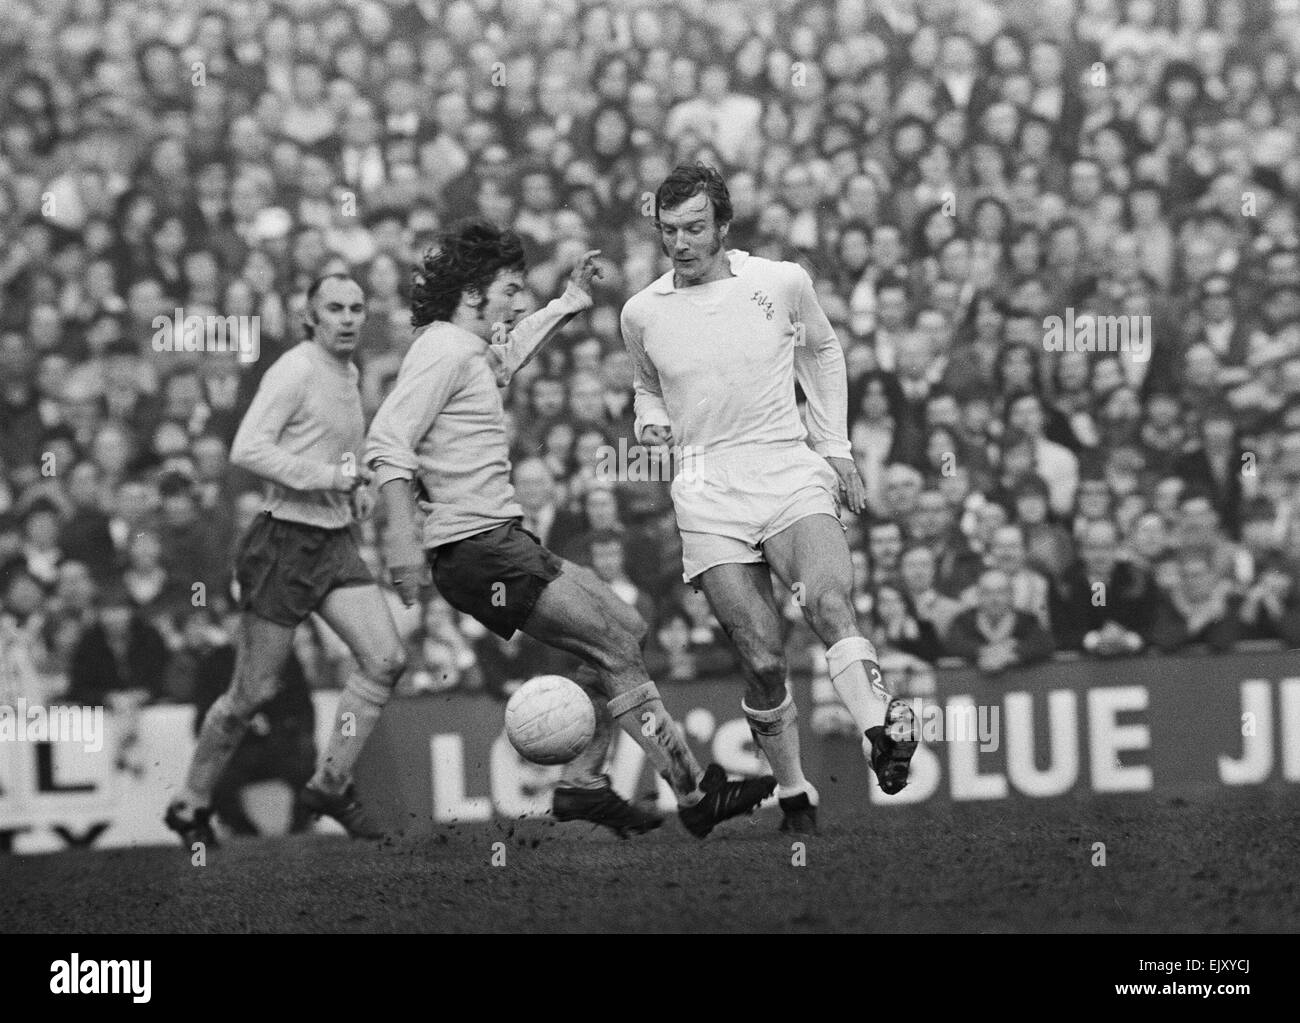 FA Cup Quarter Final match at Elland Road. Leeds United 2 v Tottenham Hotspur 1. Leeds' Paul reaney on the ball. 18th March 1972. Stock Photo